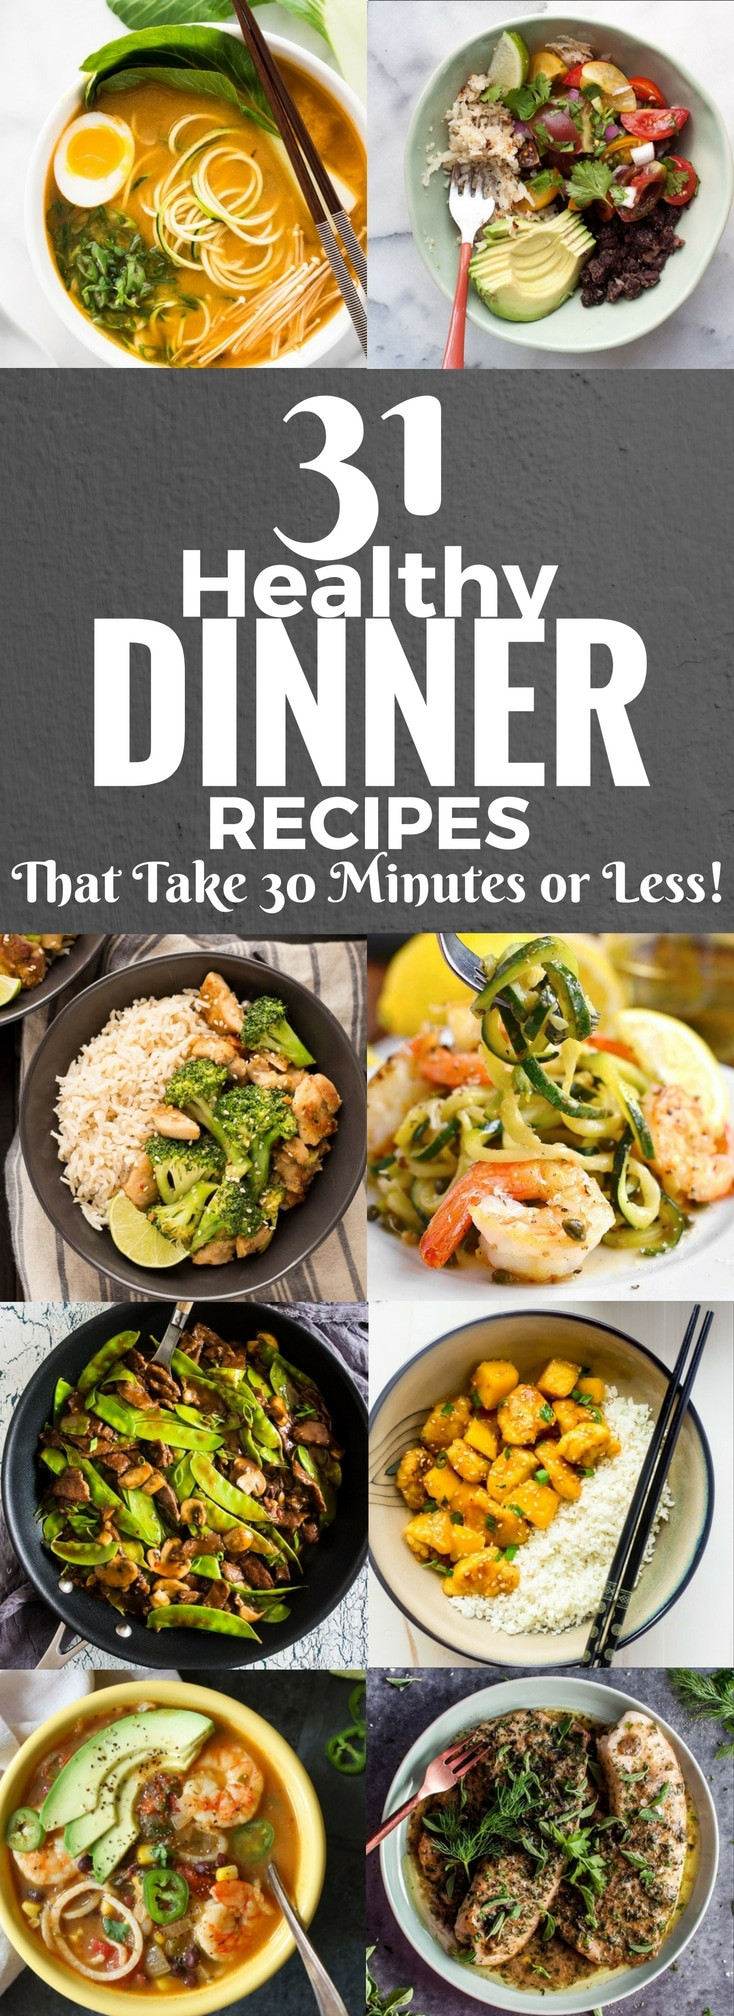 Eating Healthy Dinners
 31 Healthy Dinner Recipes That Take 30 Minutes or Less